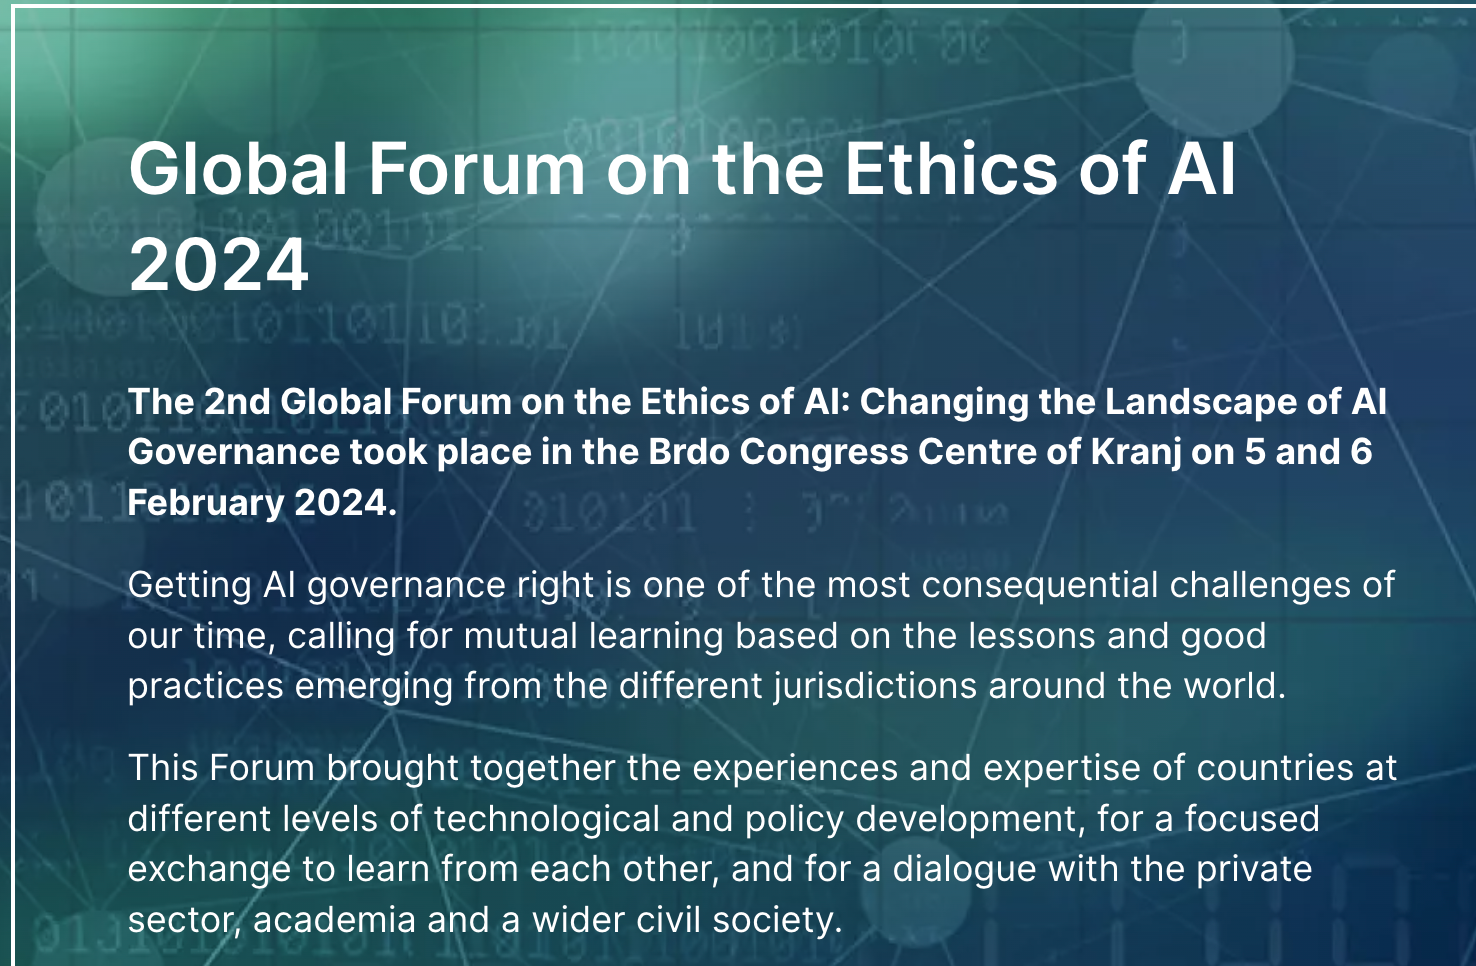 Global forum on the ethics of AI